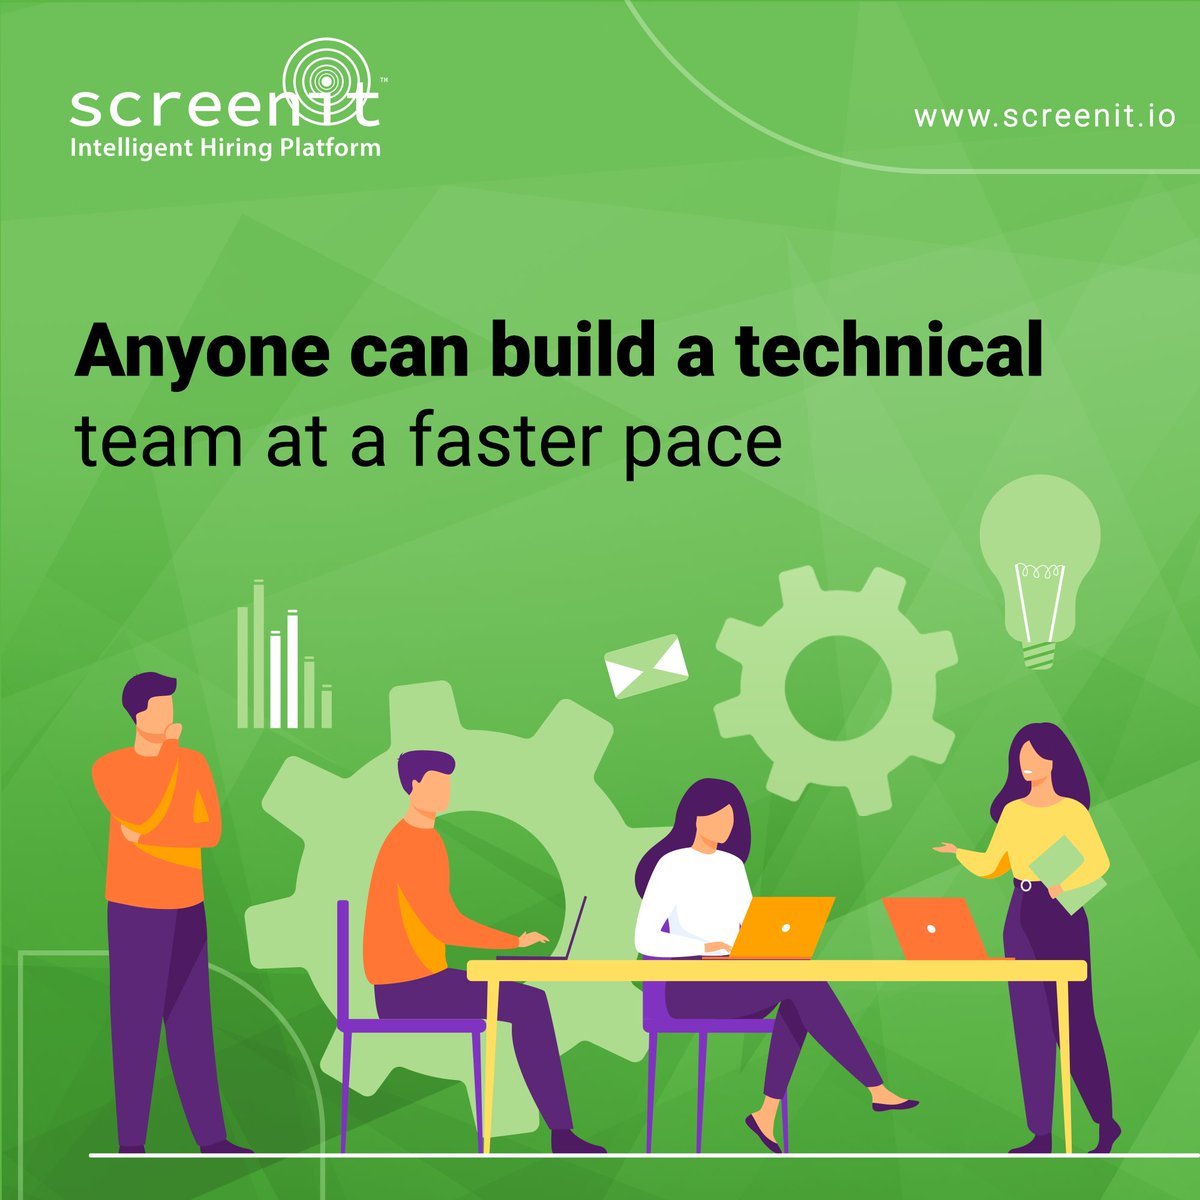 At ScreenIt, we understand the importance of building a strong tech team. 
Get started today and take your team to new heights!
For Enquiry:  +91 9360964607, 91 9176676006, +91 9360964605

#TechTeam #ScreenItHiring #ScreenIt #techhiring